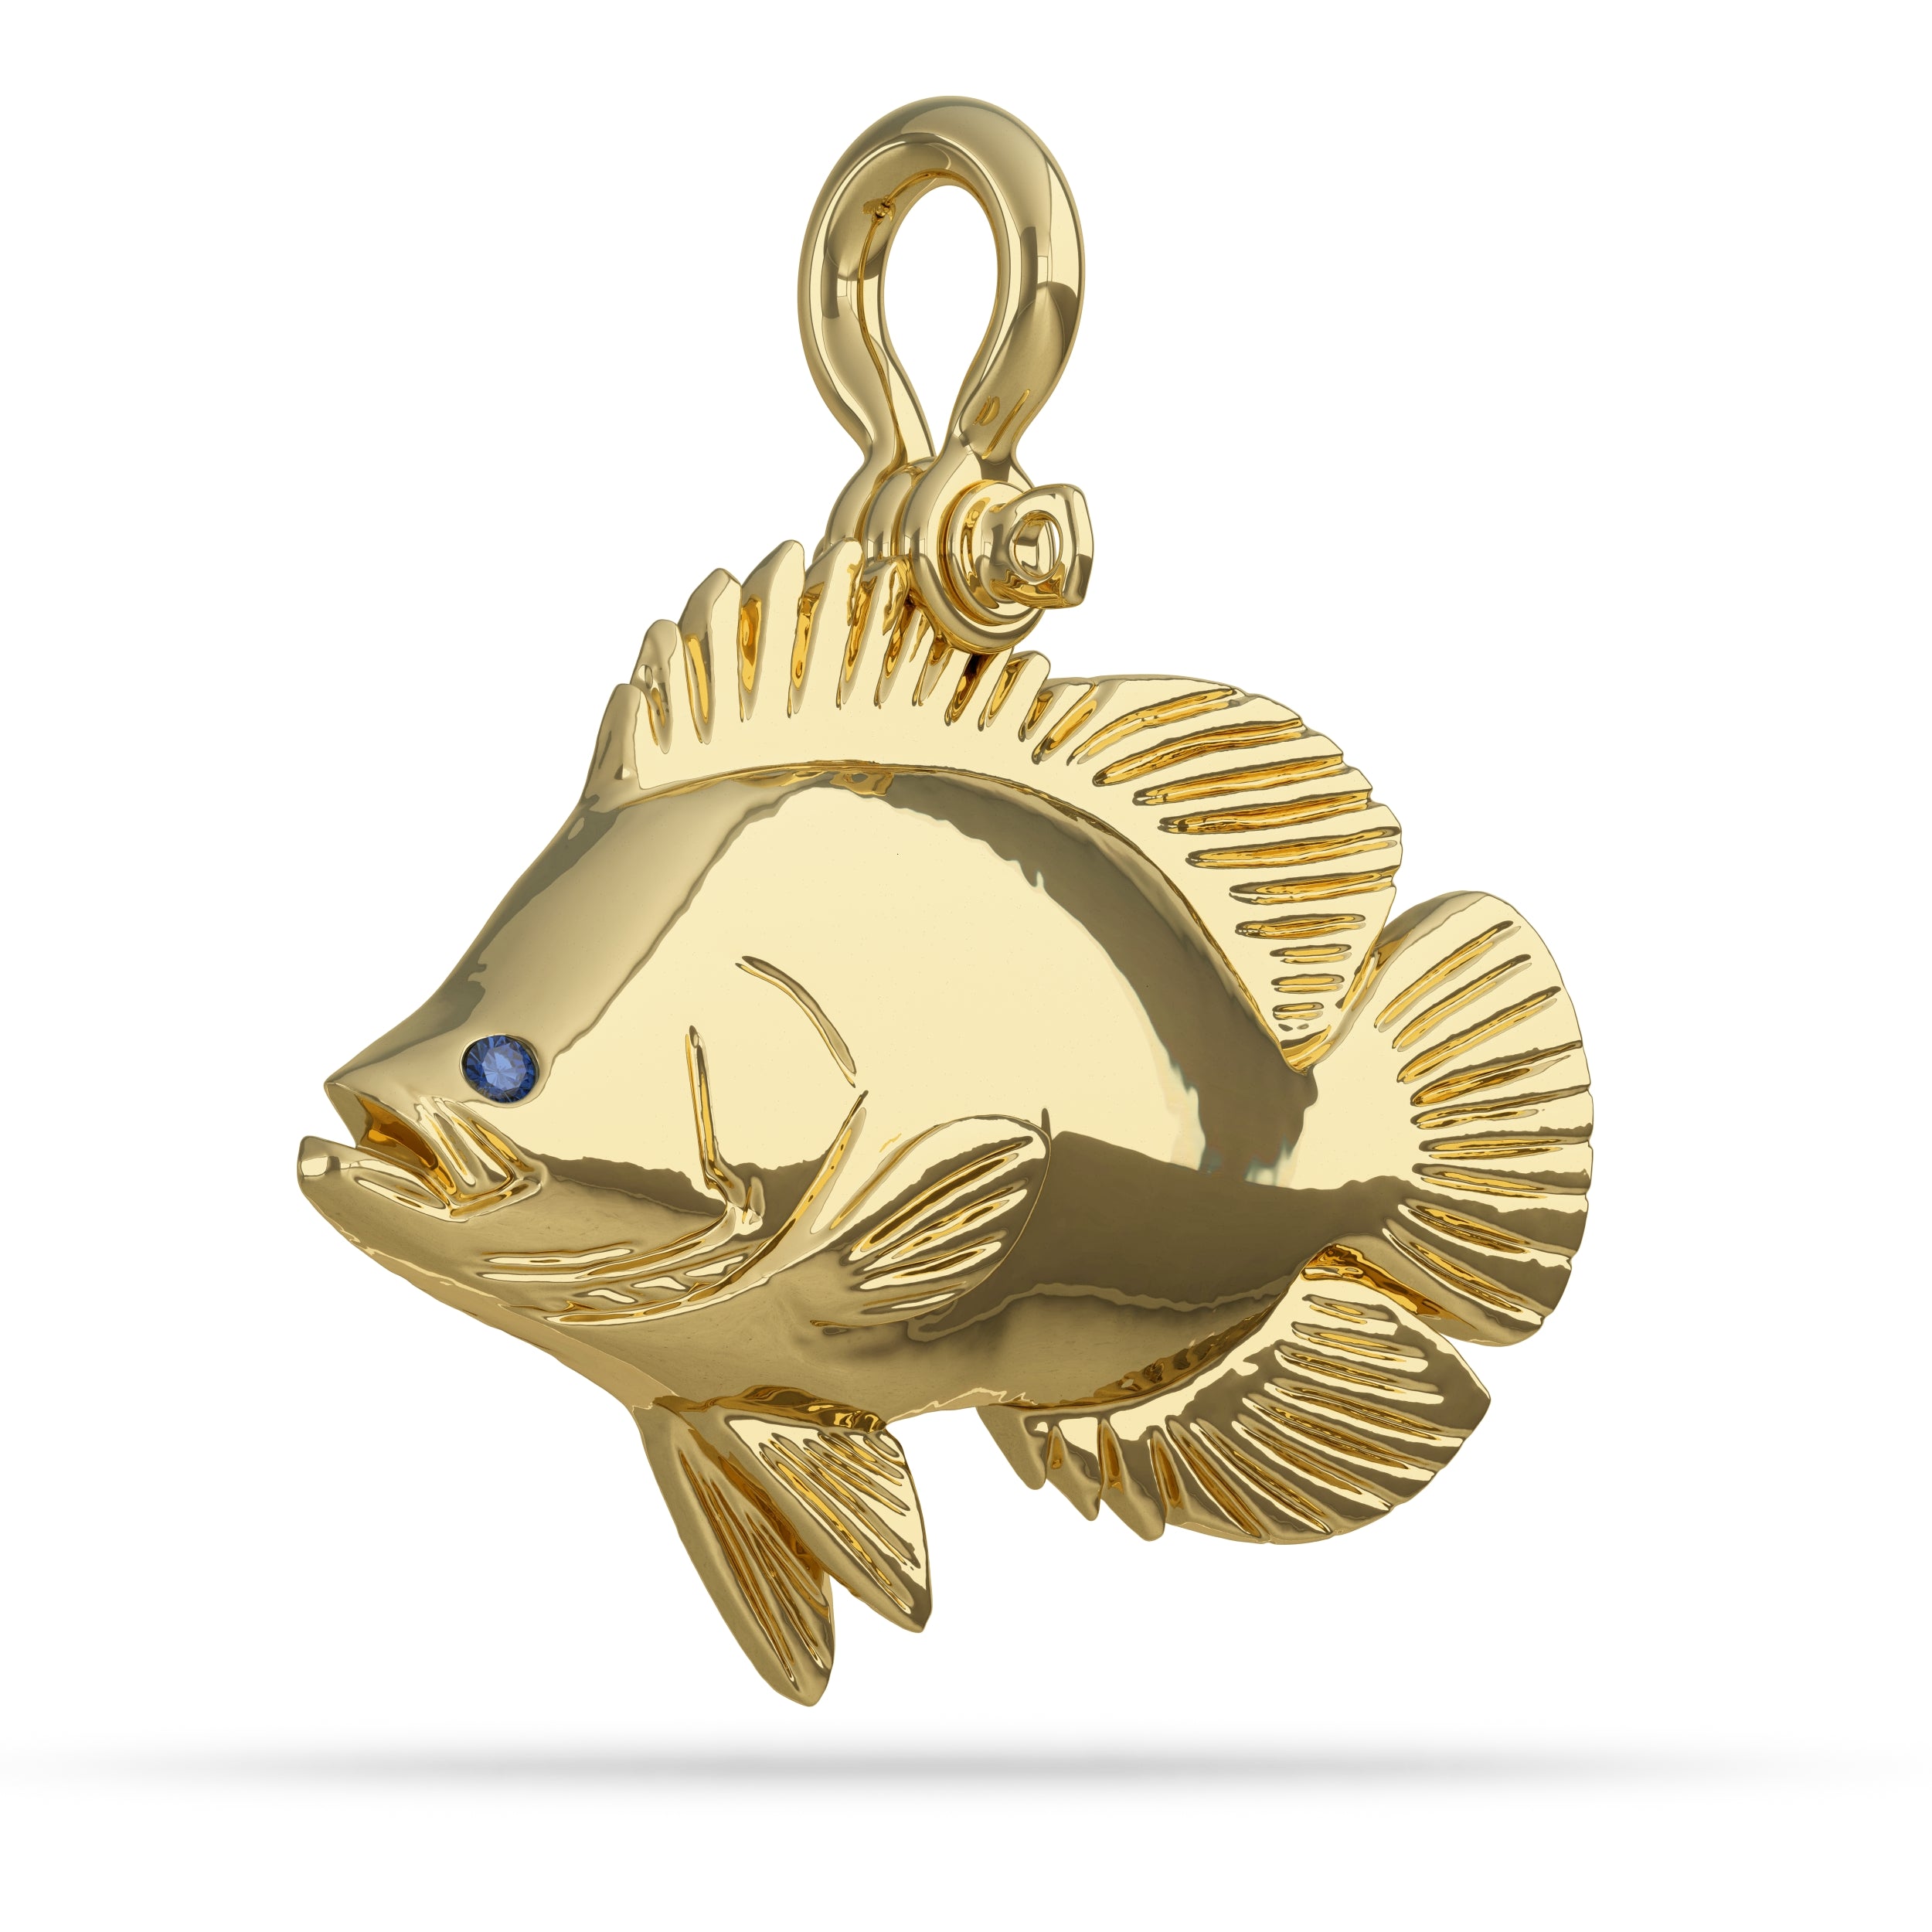 Solid 14k Gold Atlantic Tripletail Pendant High Polished Mirror Finish With Blue Sapphire Eye with A Mariner Shackle Bail Custom Designed By Nautical Treasure Jewelry In The Florida Keys Lobotes Surinamensis